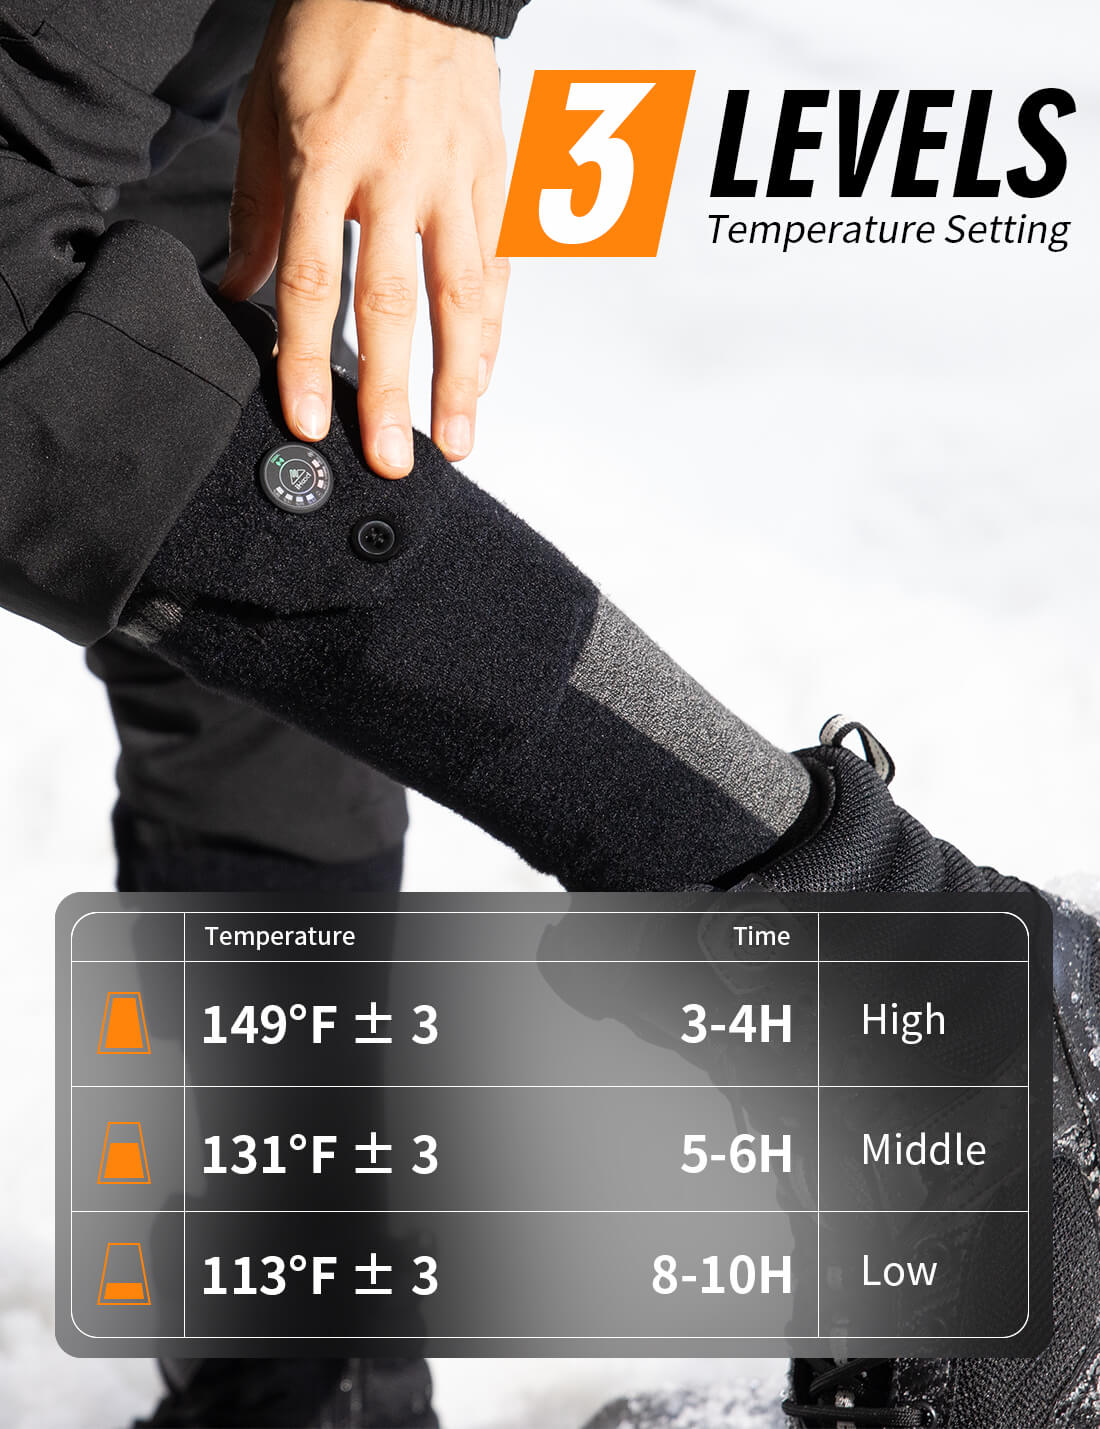 Heated Socks for Men and Women With APP Control 7.4V 3000mAh Battery